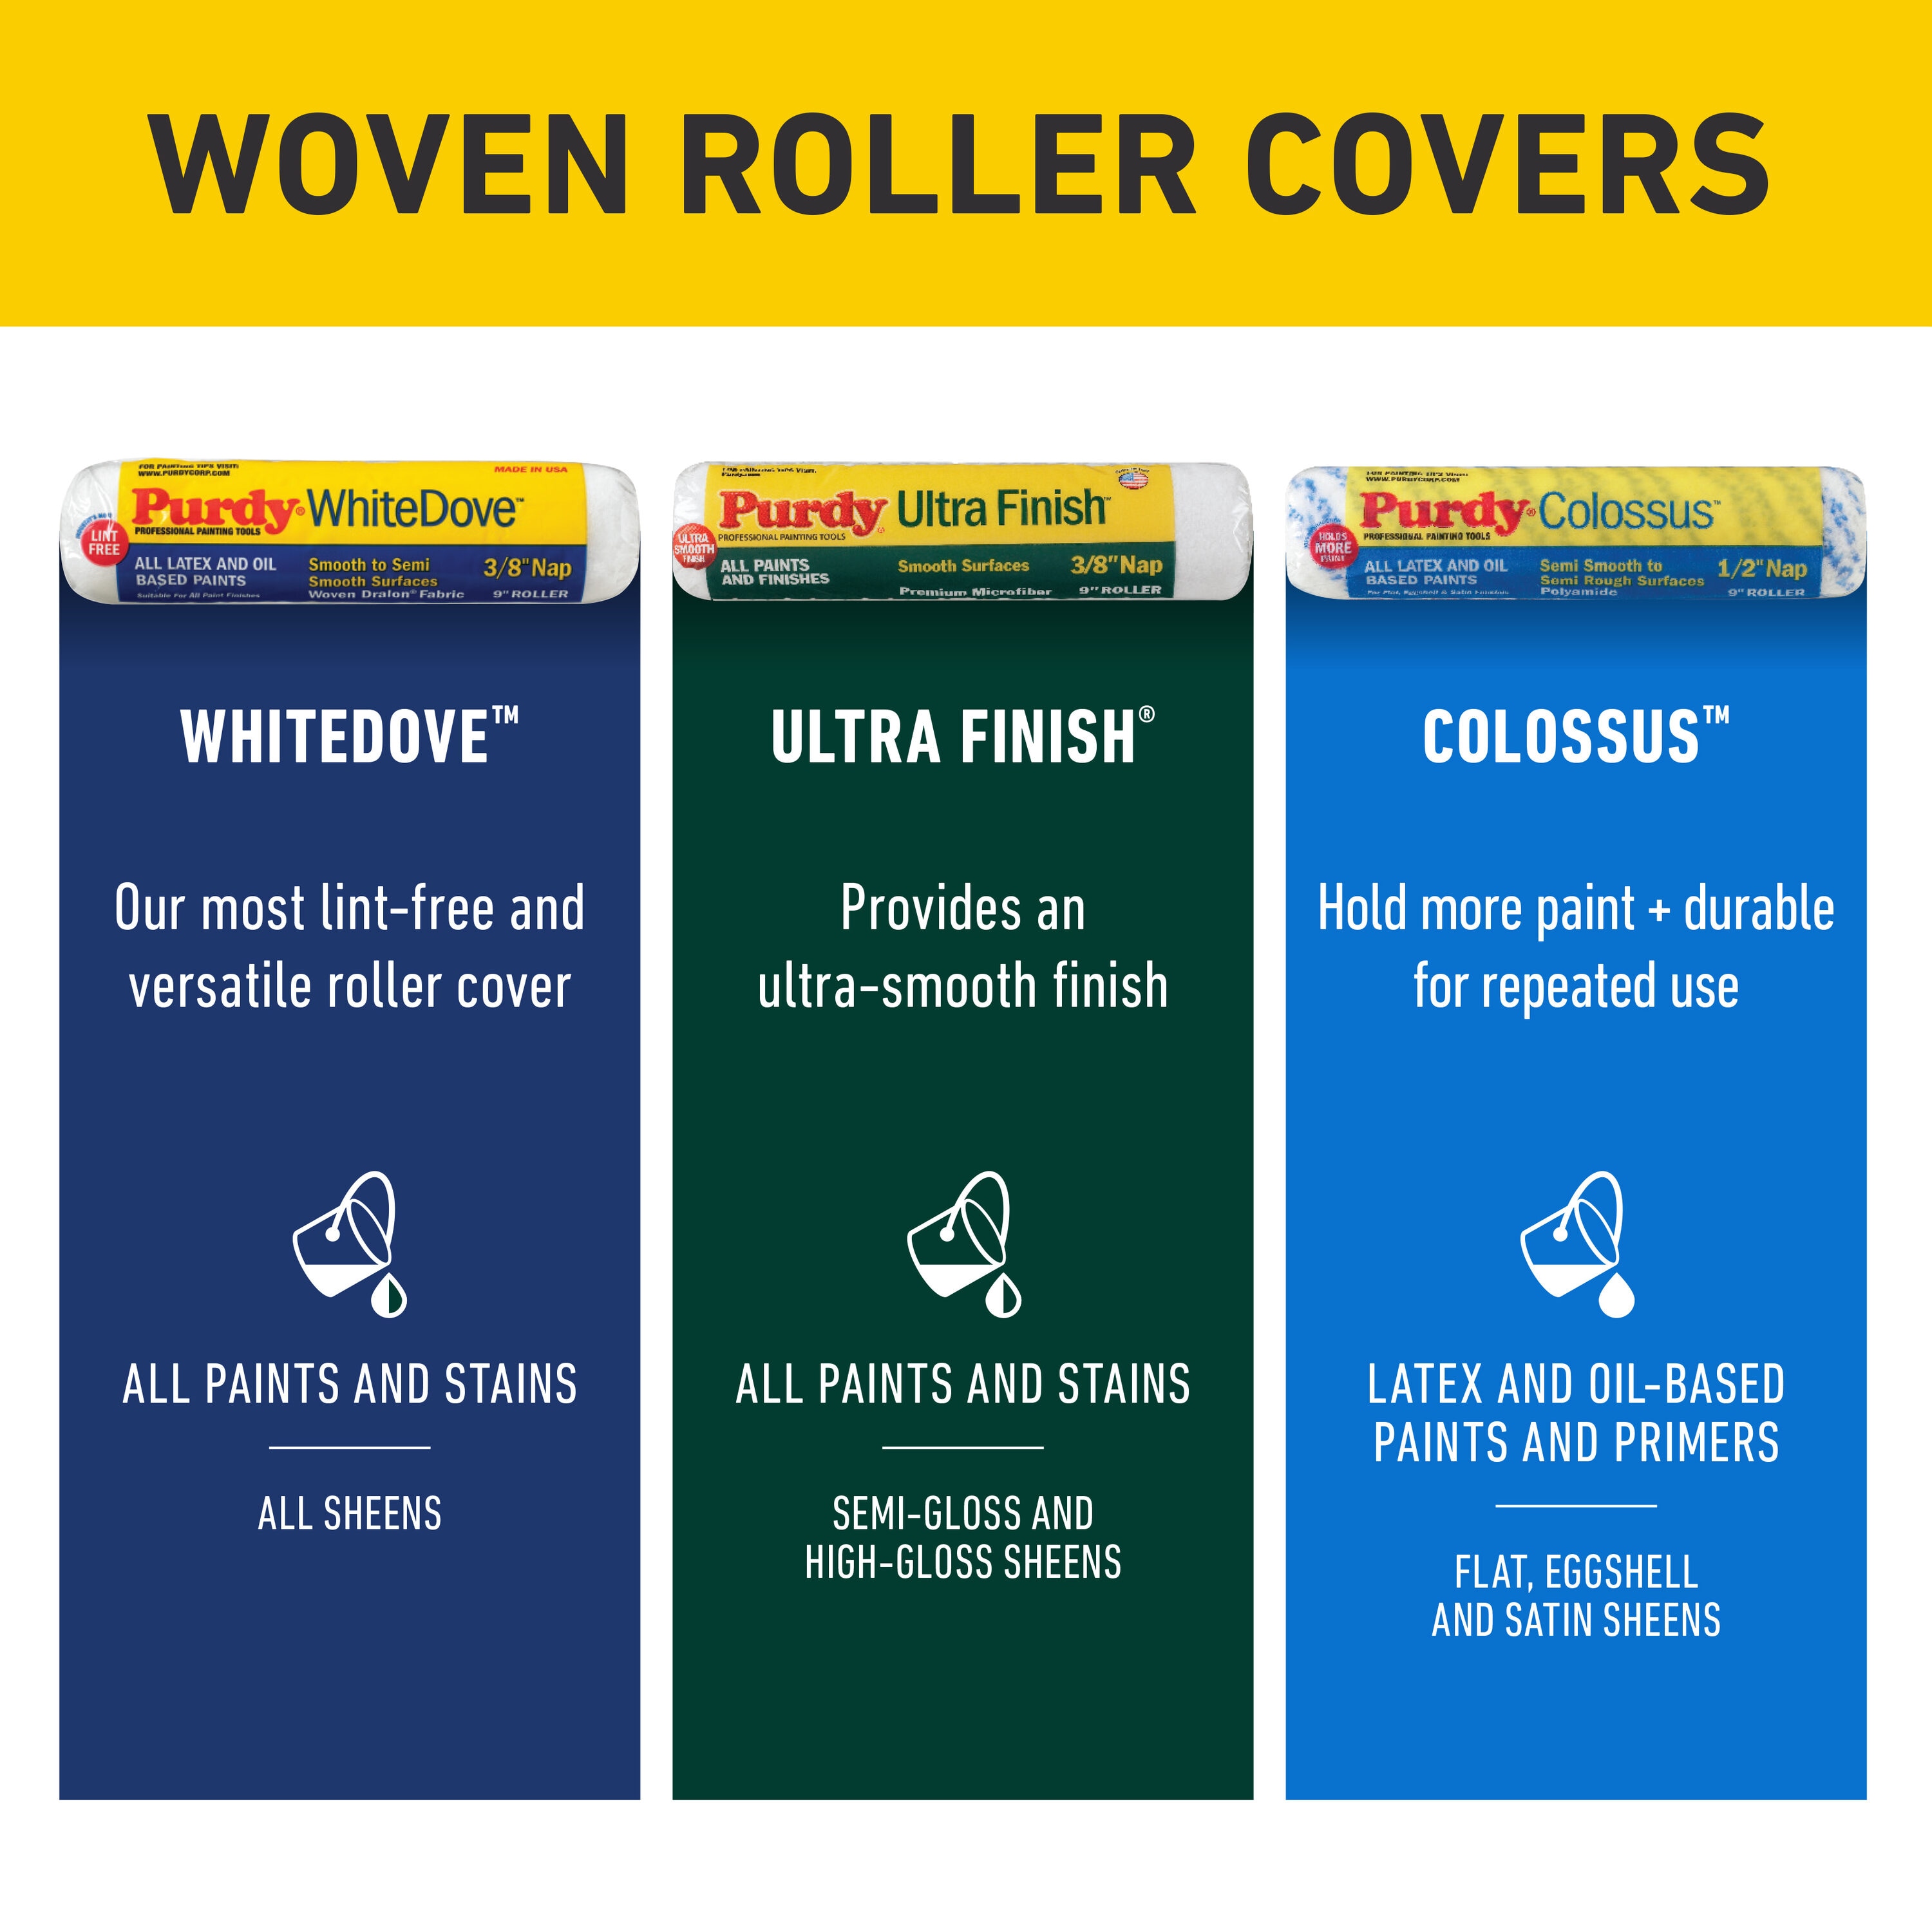 36 Pro-Grade Woven Shed-Resistant Roller Cover - 1/2 Nap, no End Caps